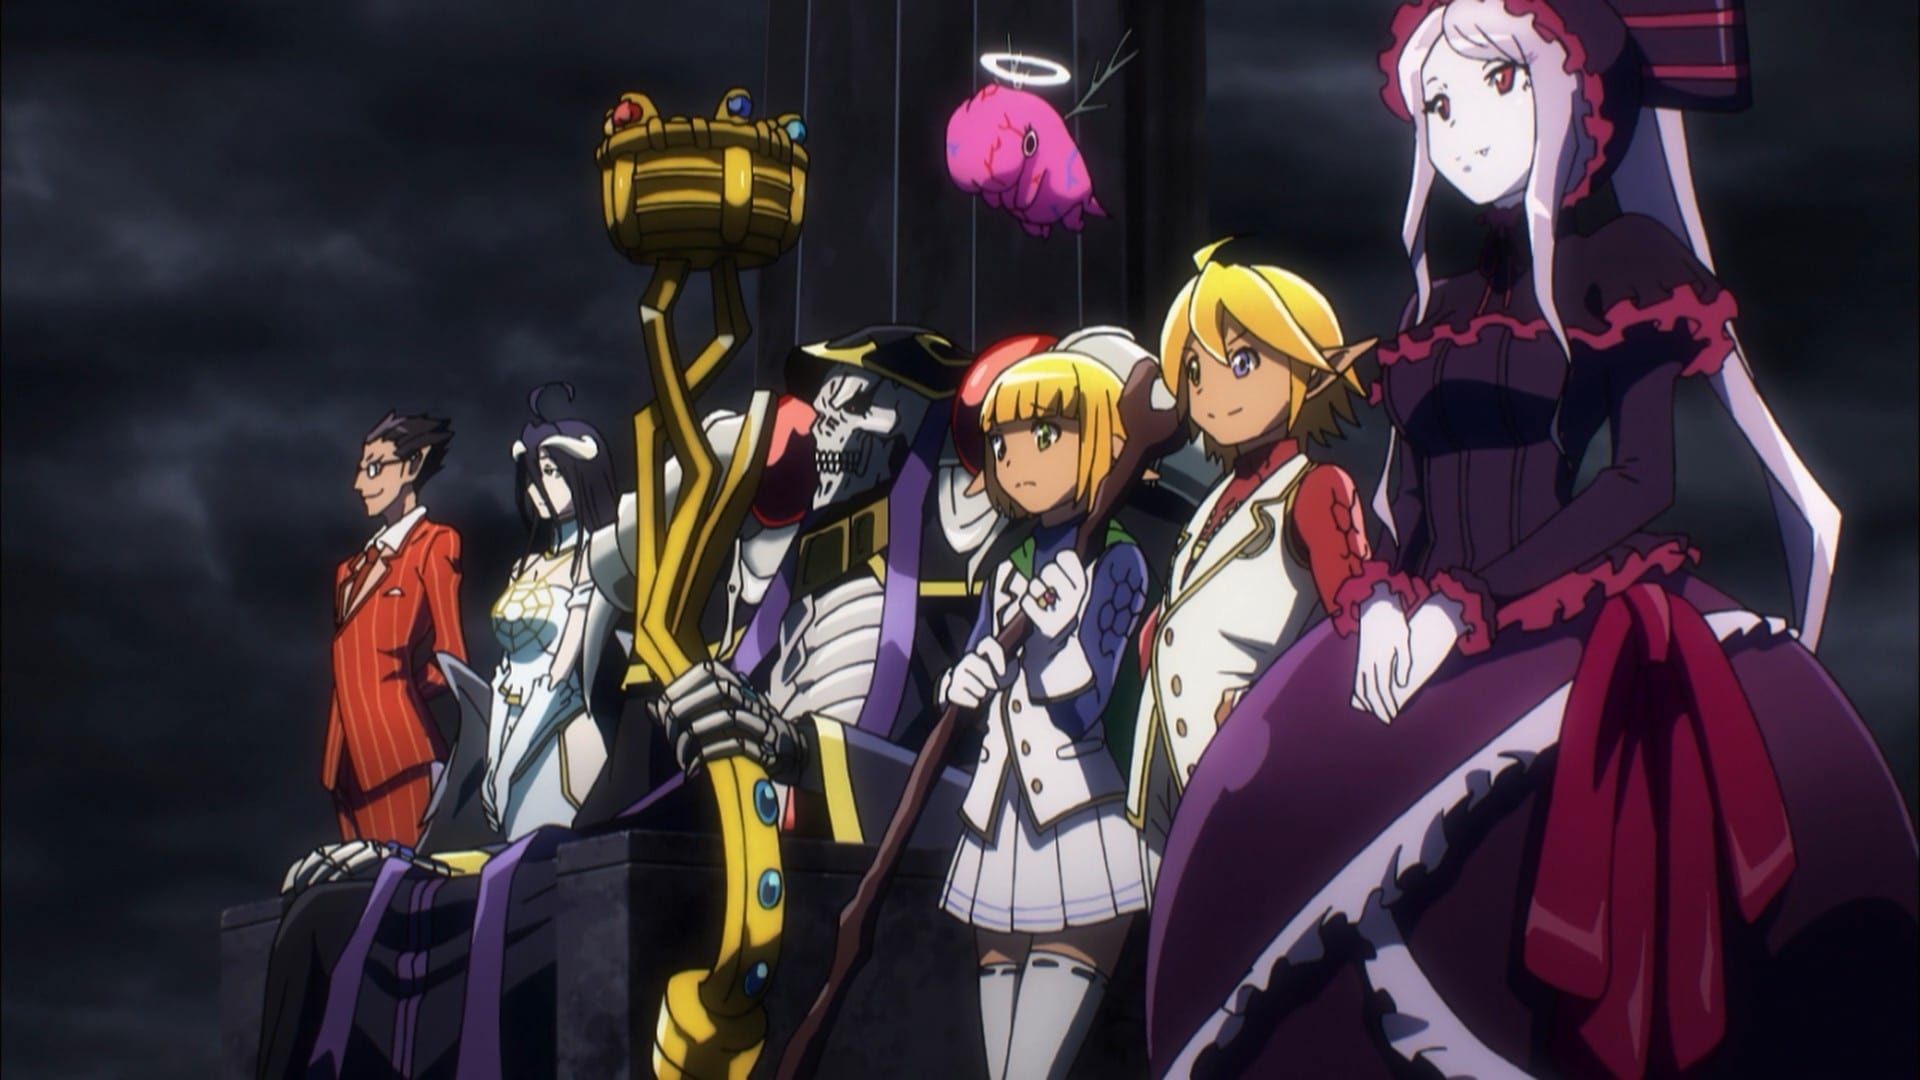 Watch Overlord season 2 episode 1 streaming online